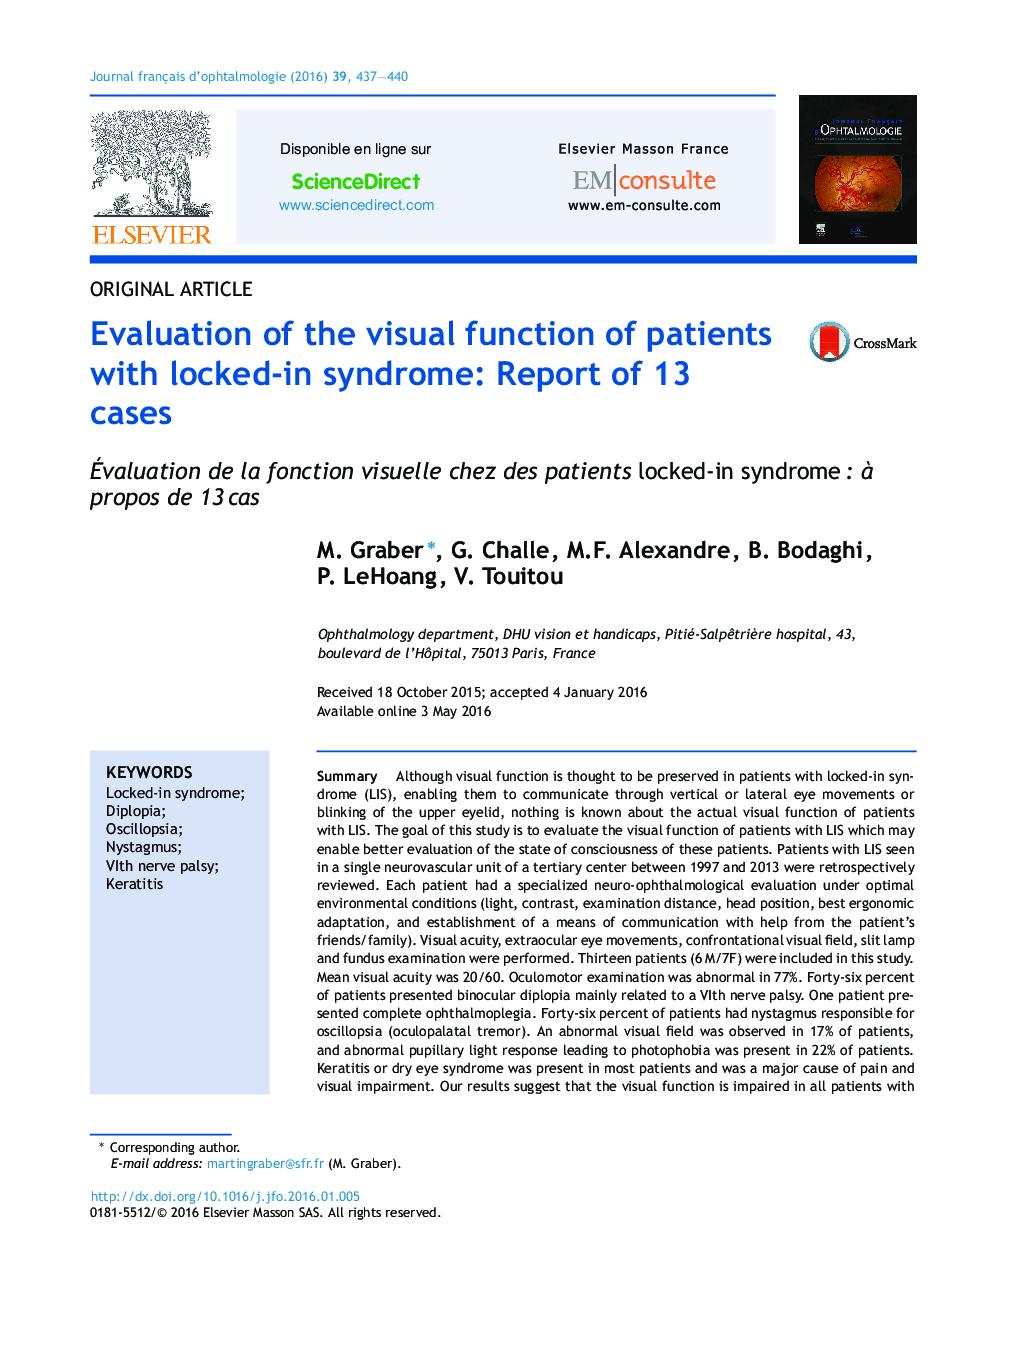 Evaluation of the visual function of patients with locked-in syndrome: Report of 13 cases